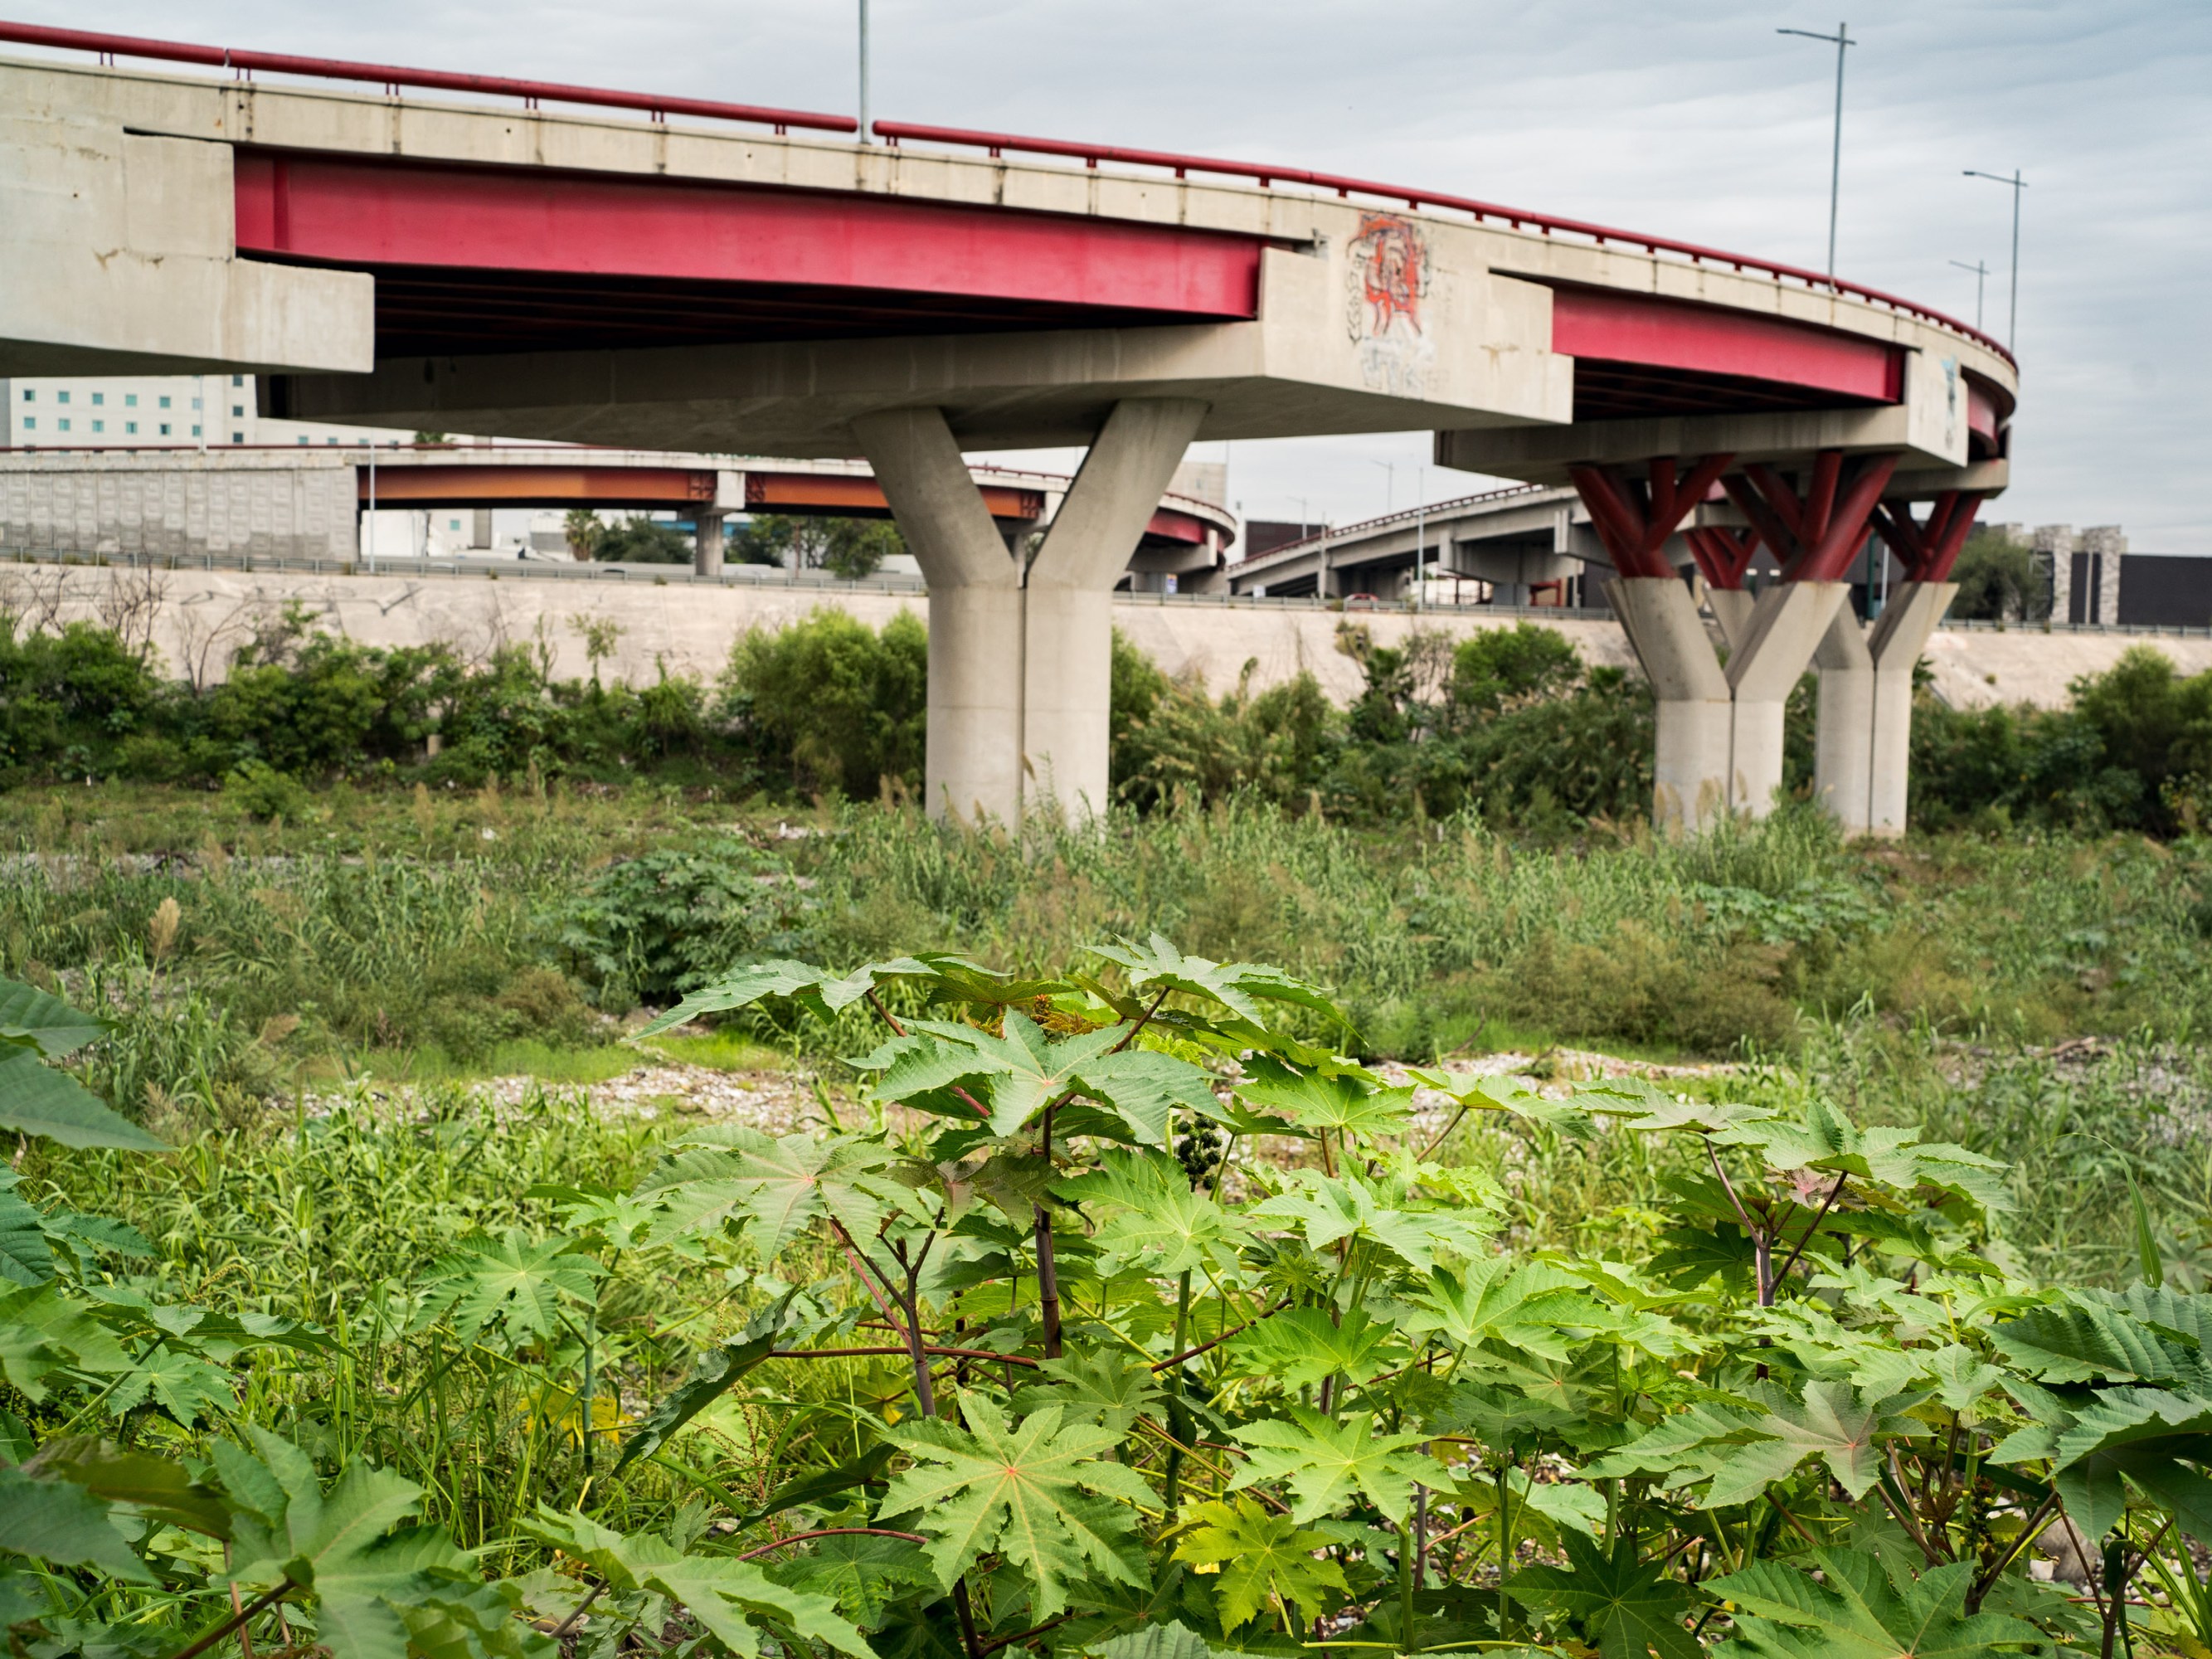 overgrowth in the area below an overpass